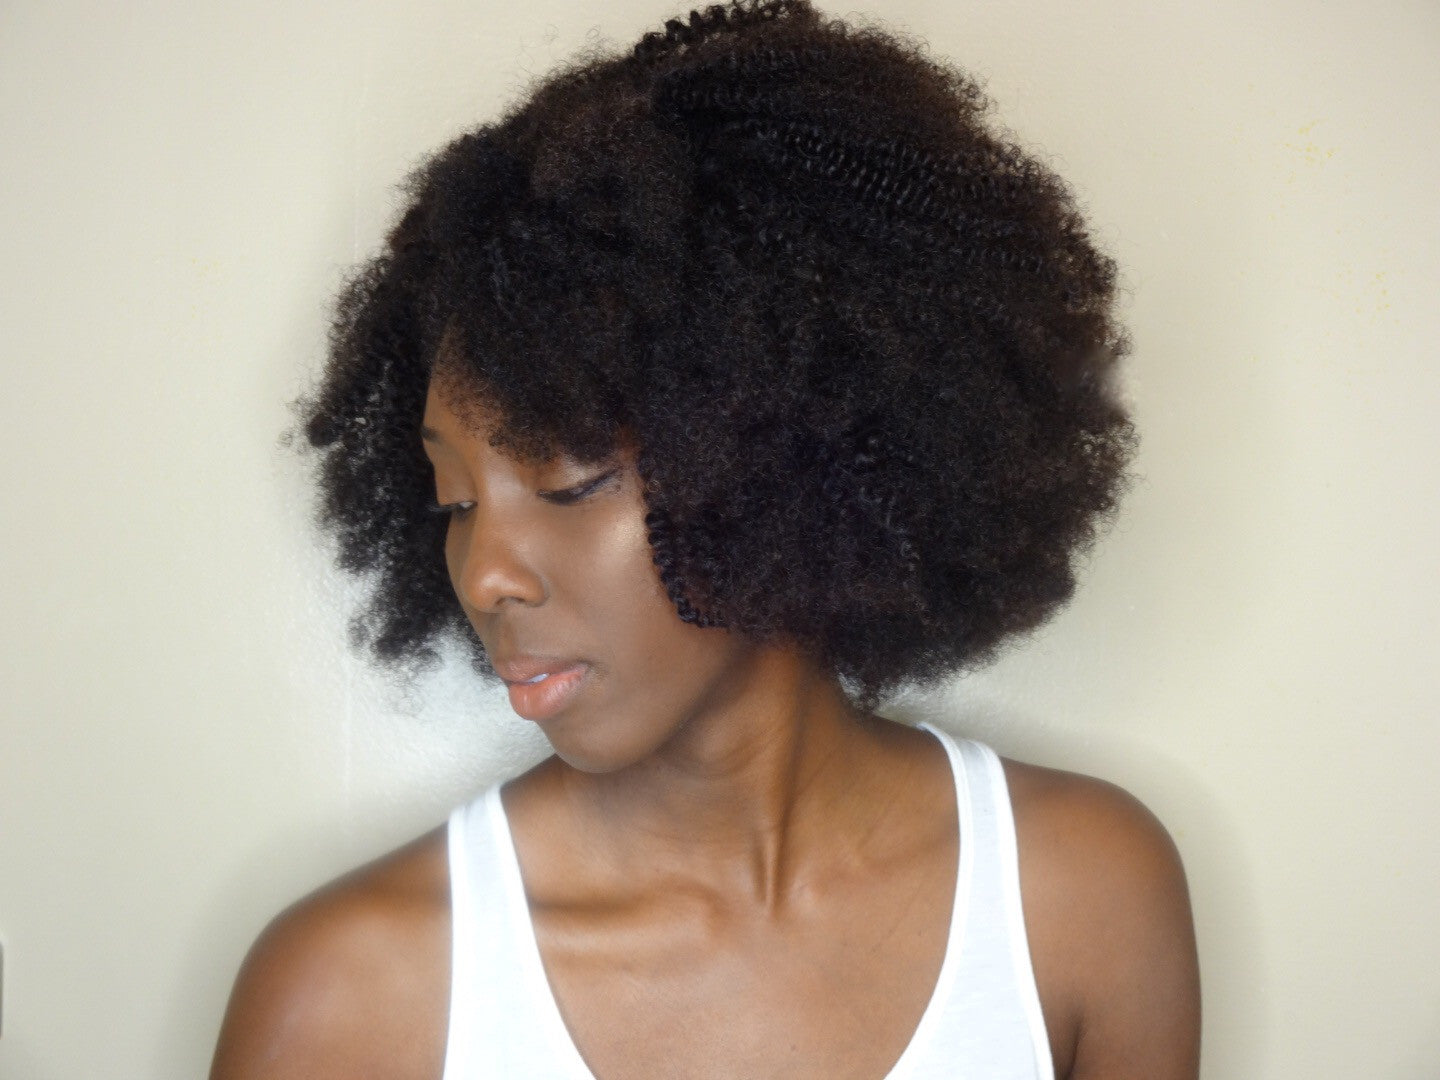 Transform Your Tapered Cut With Natural Hair Clip Ins!